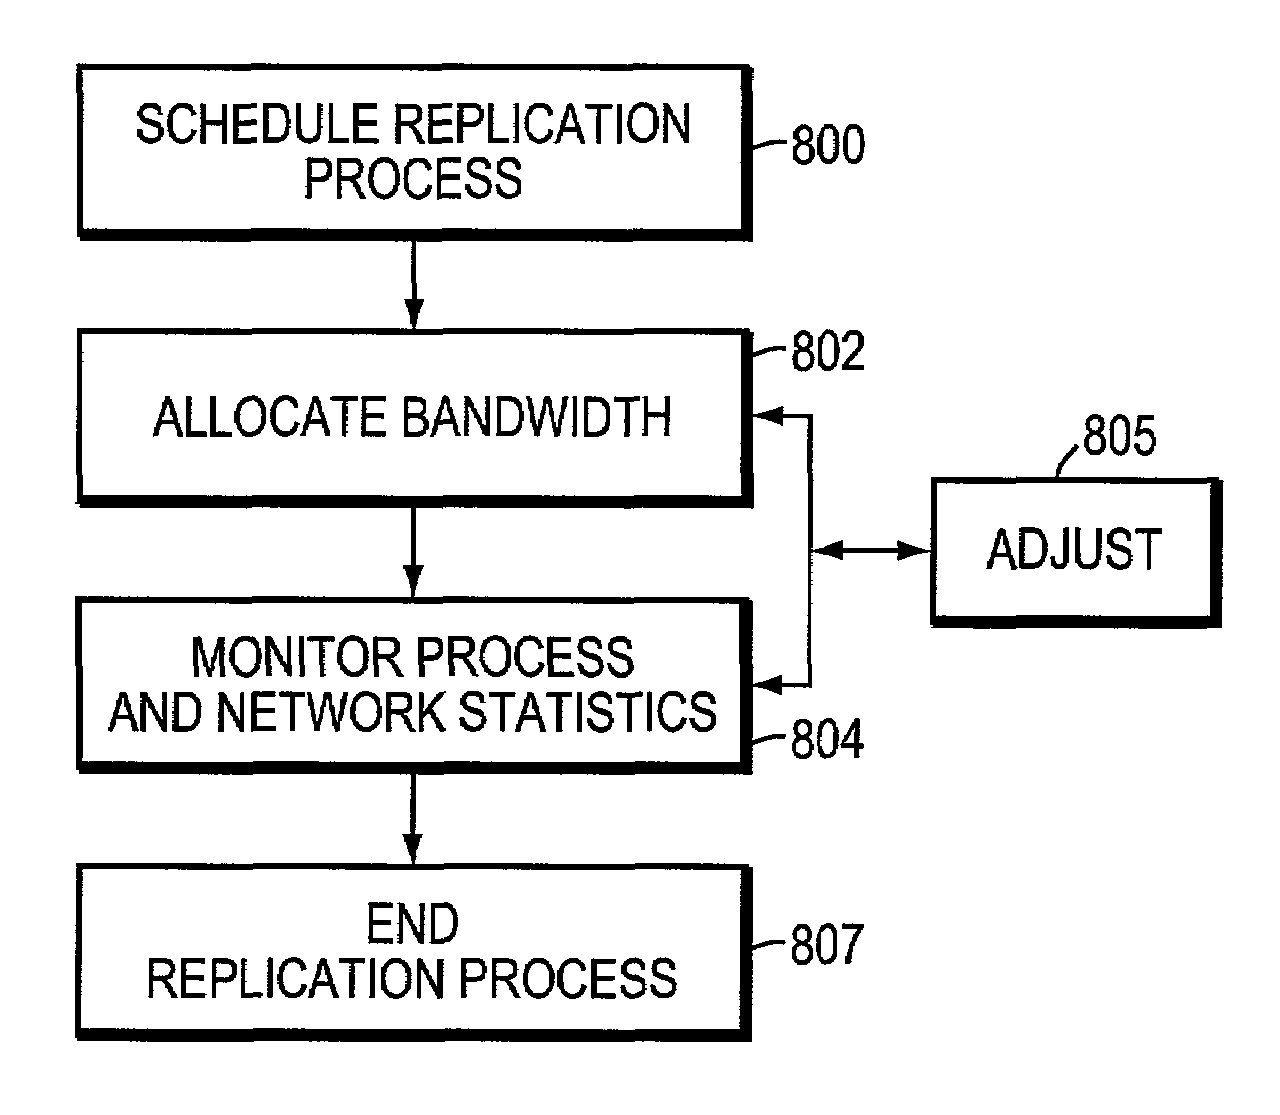 Network management for replication of data stored in a data storage environment